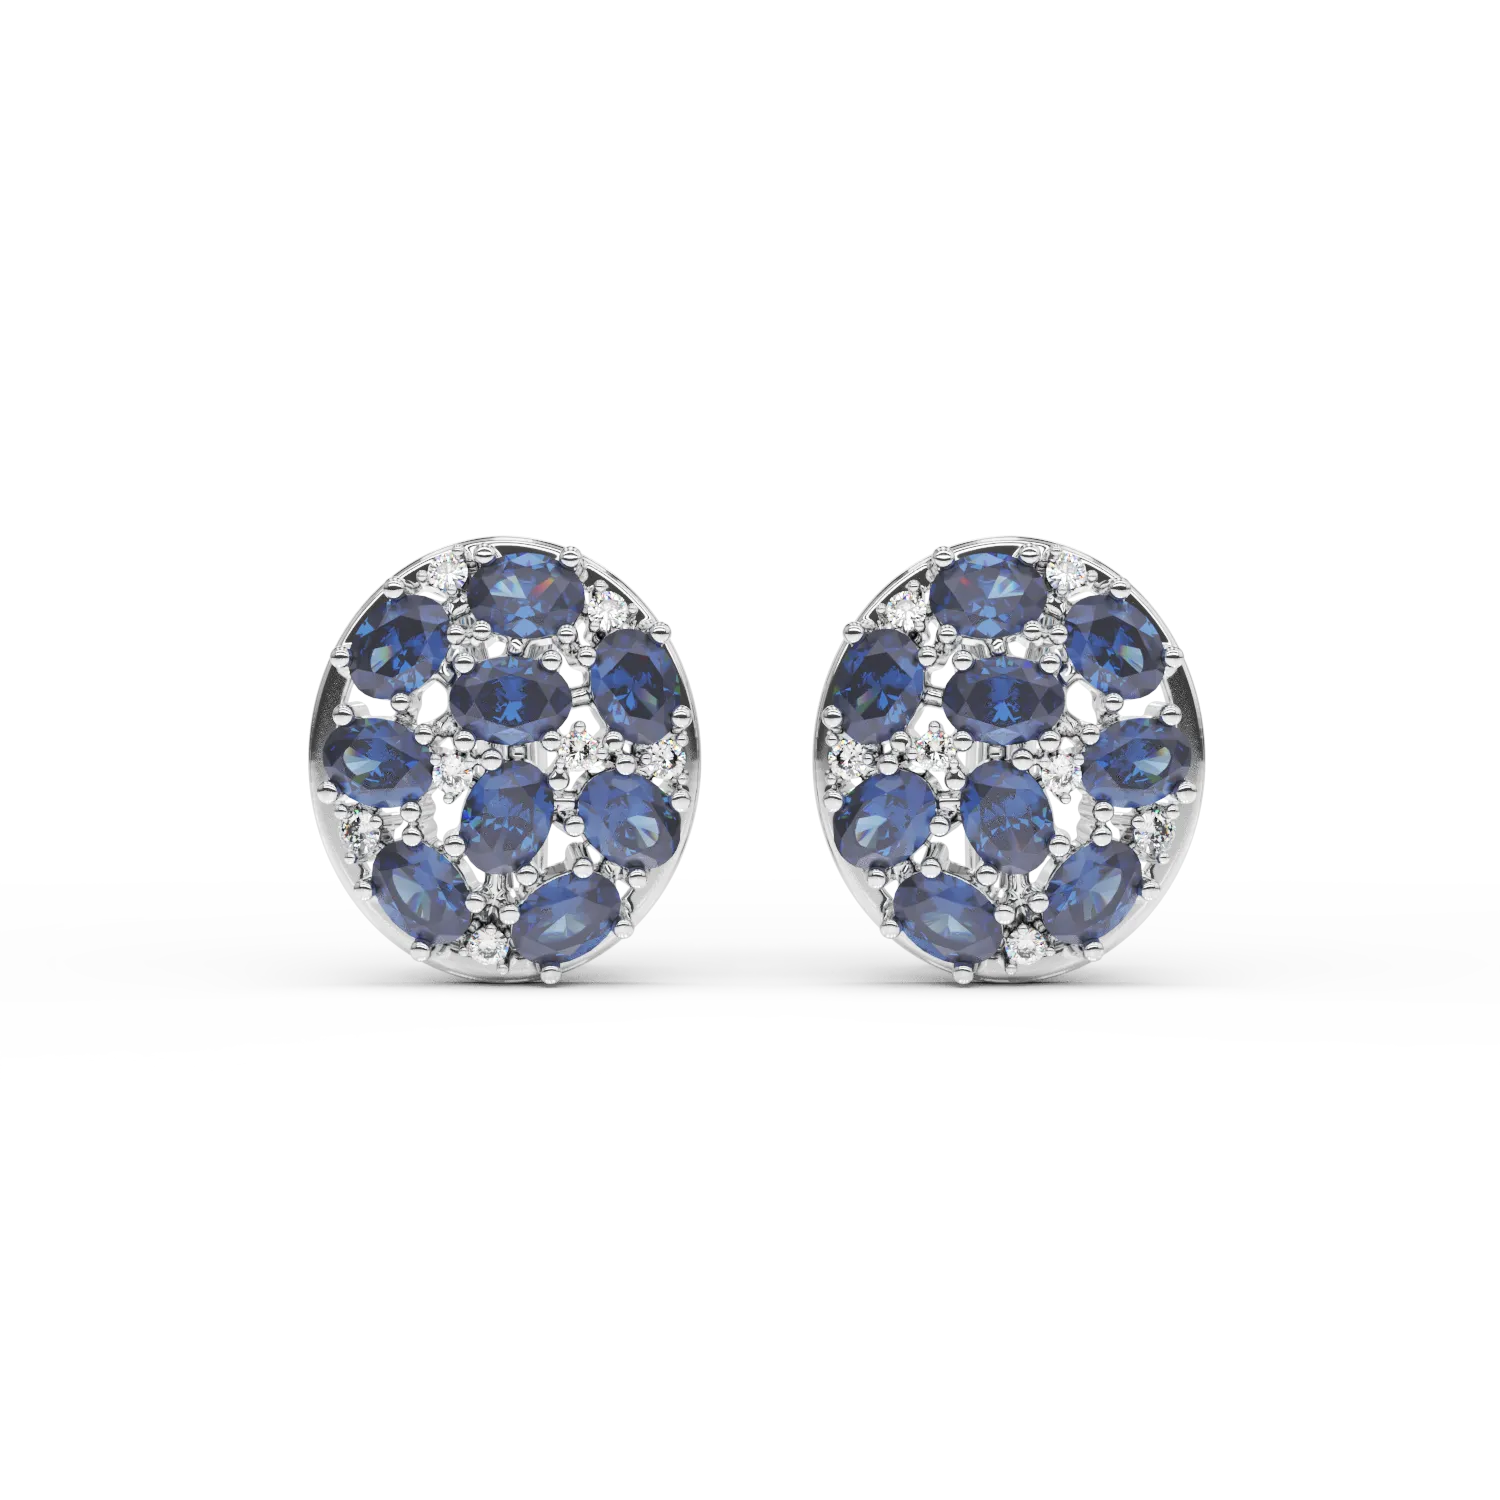 14K white gold earrings with 5.36ct sapphires and 0.12ct diamonds